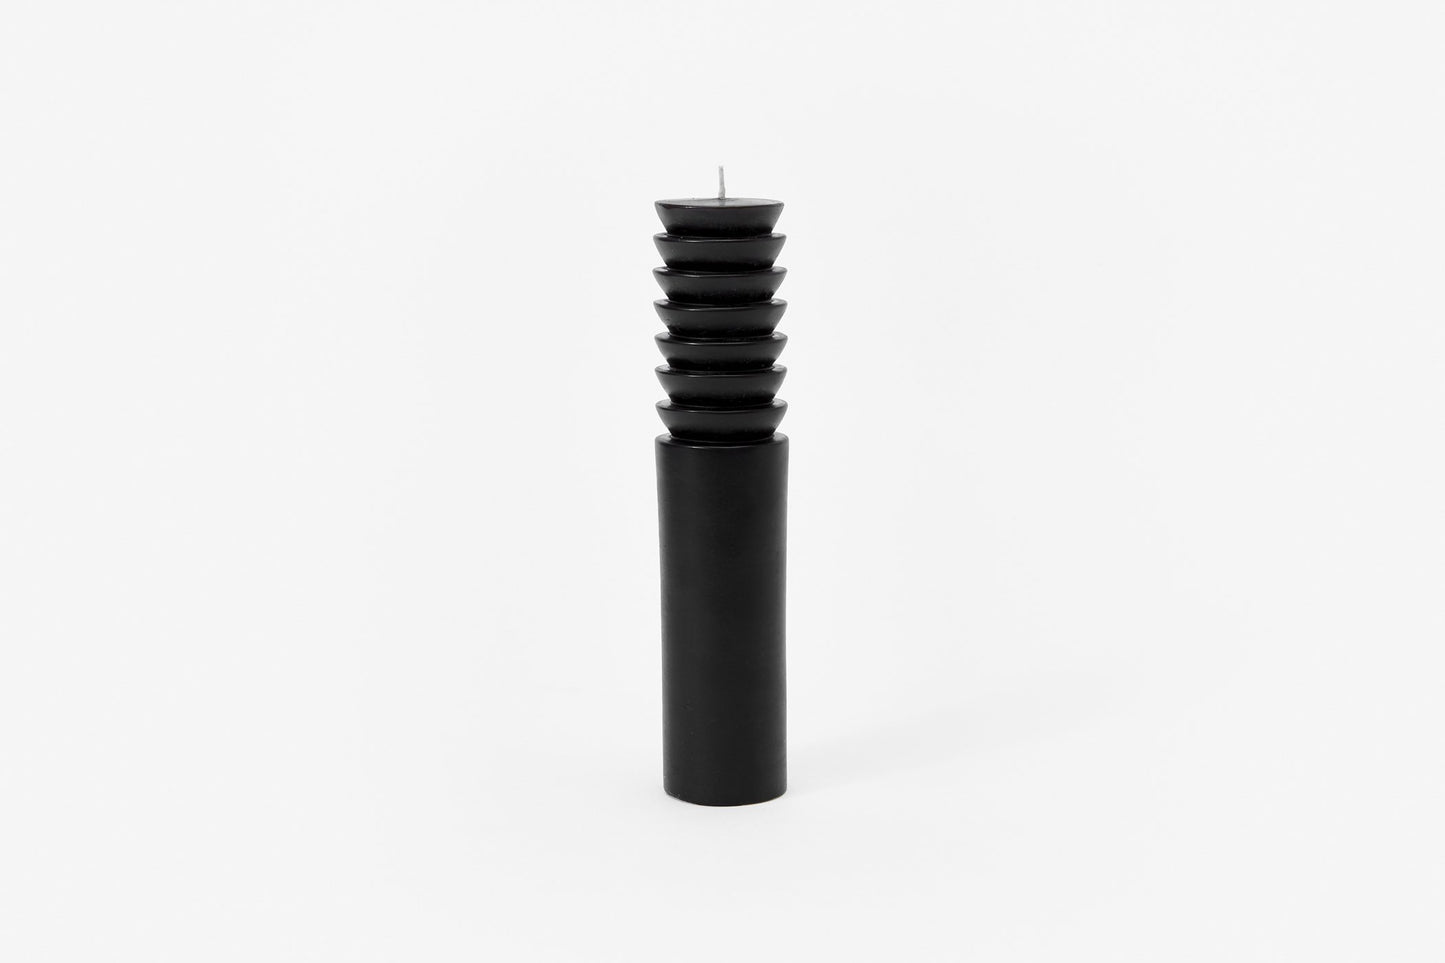 Areawear Totum Candle in Black, large. Available at Easy Tiger Goods Toronto.